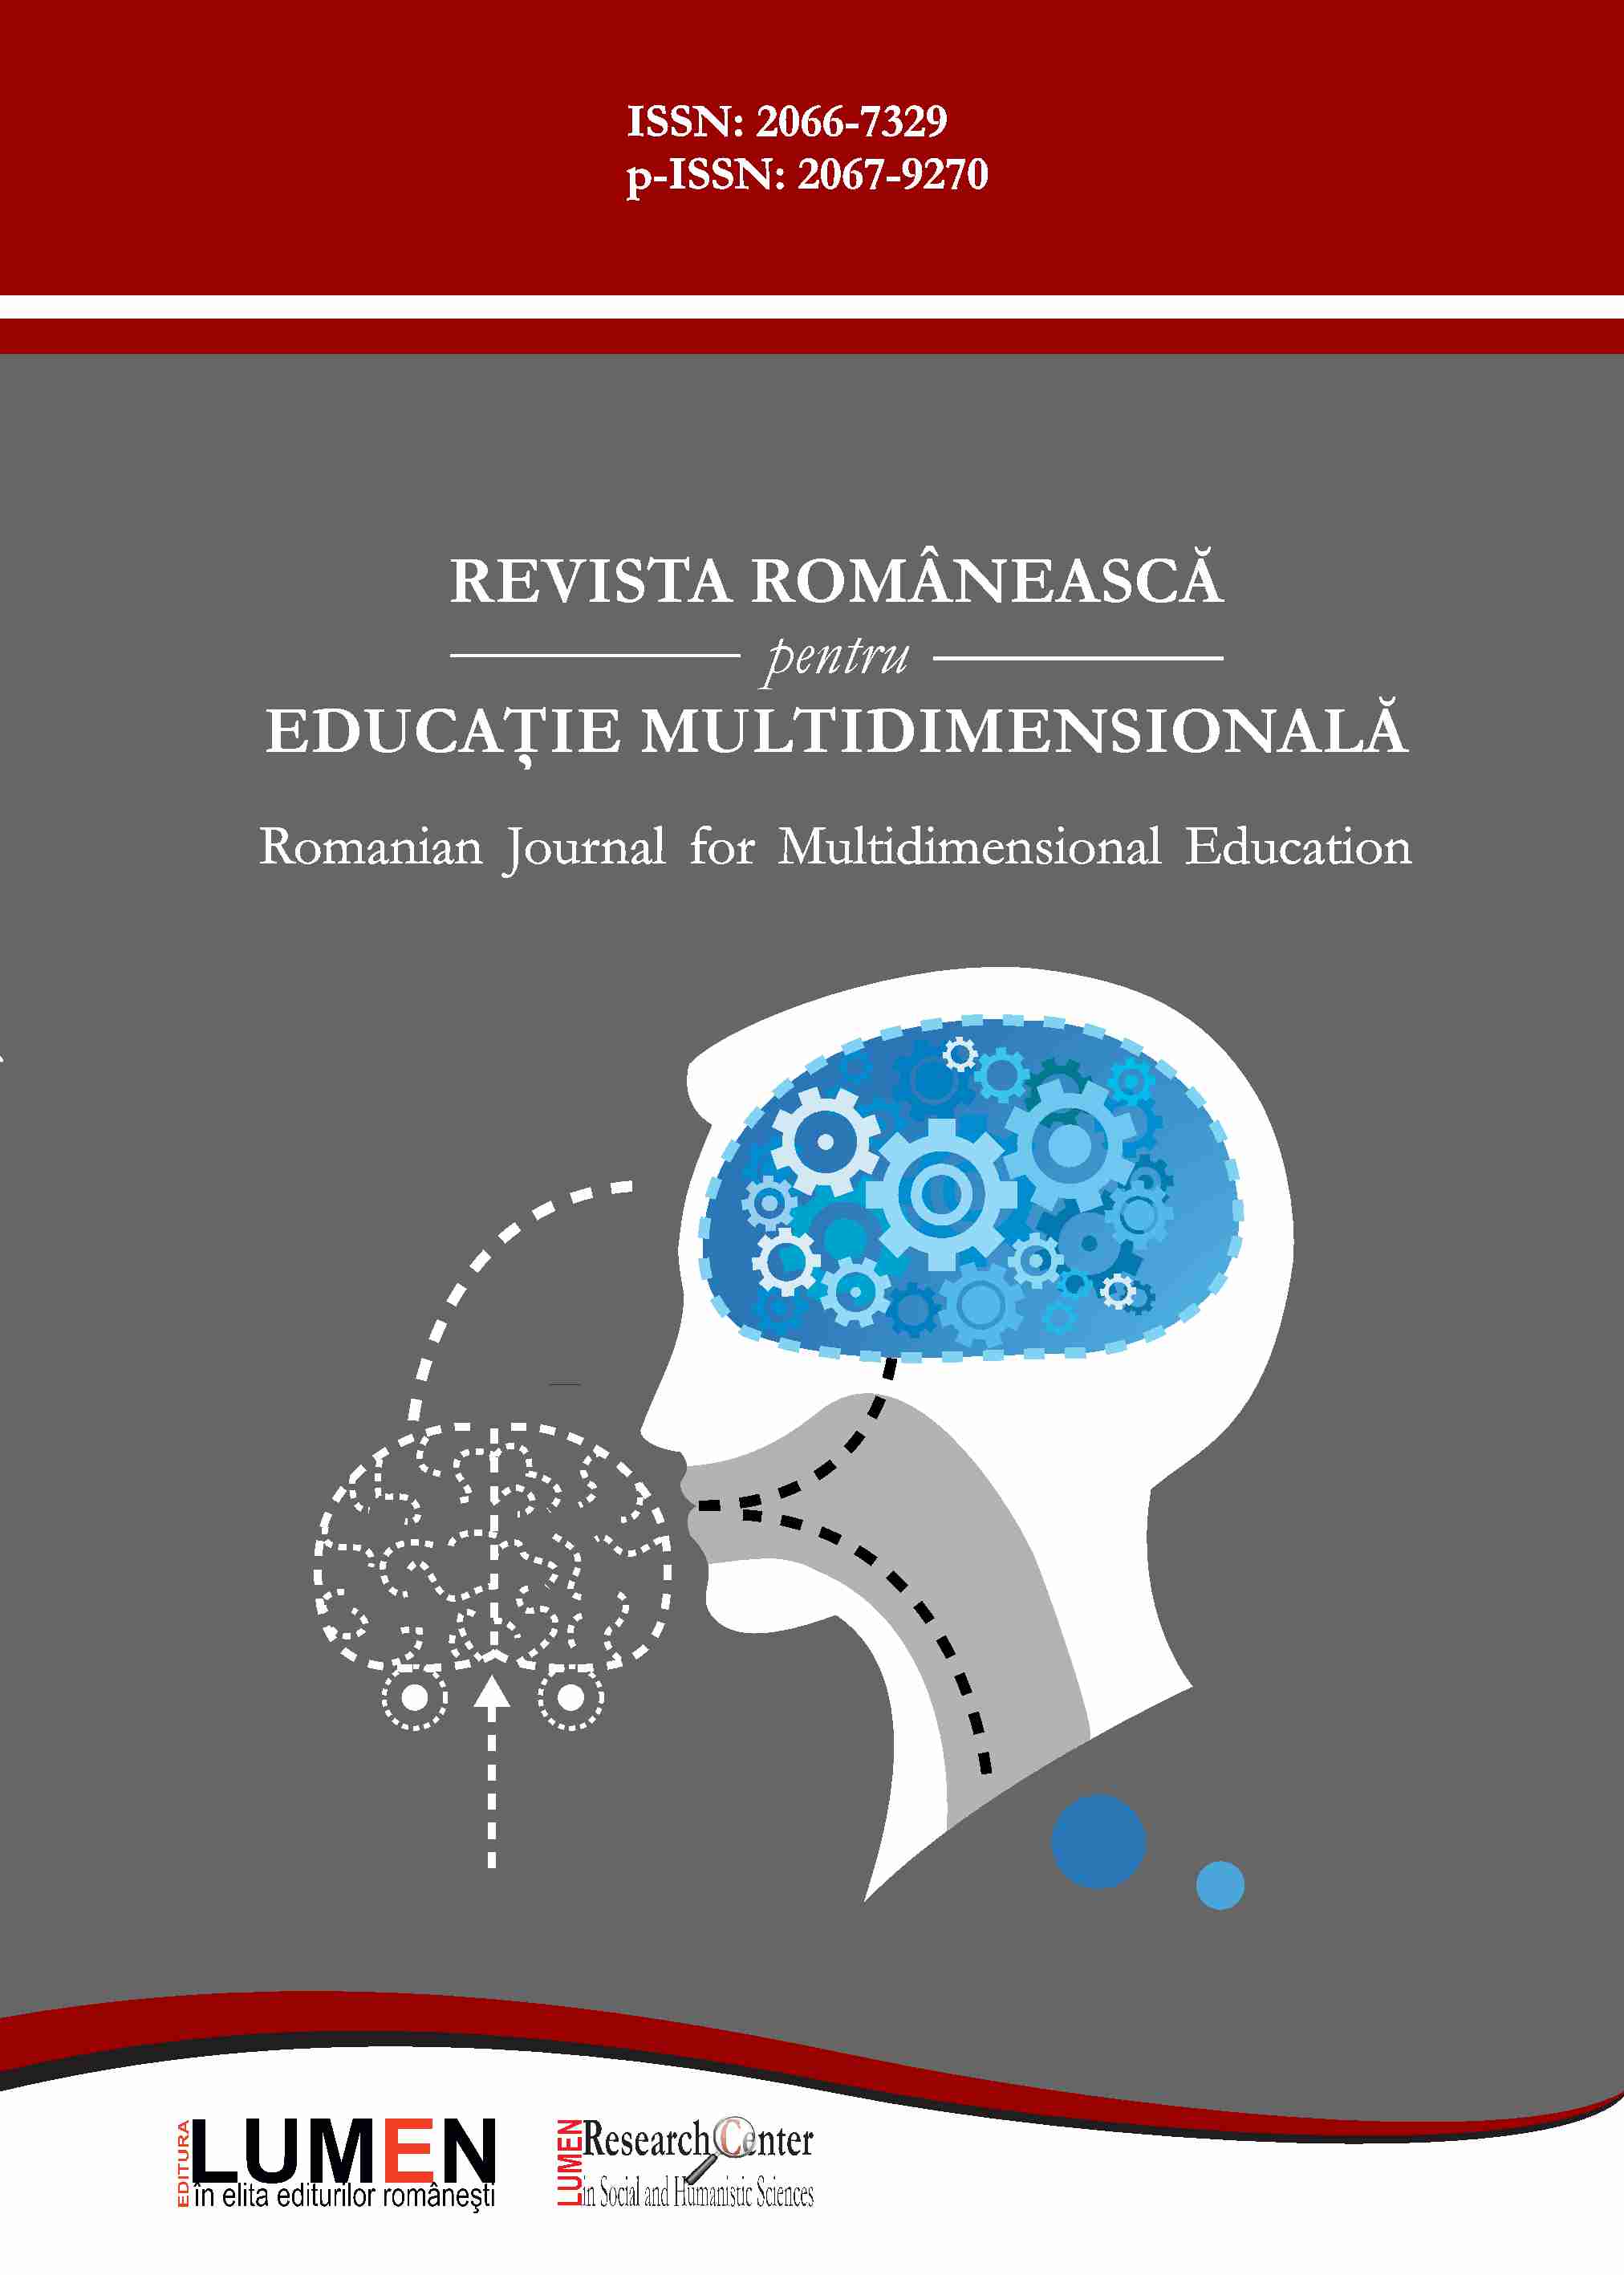 MOOC as Remote ESP Learning Tool at University in Quarantine: Focus on Students’ Attitudes Cover Image